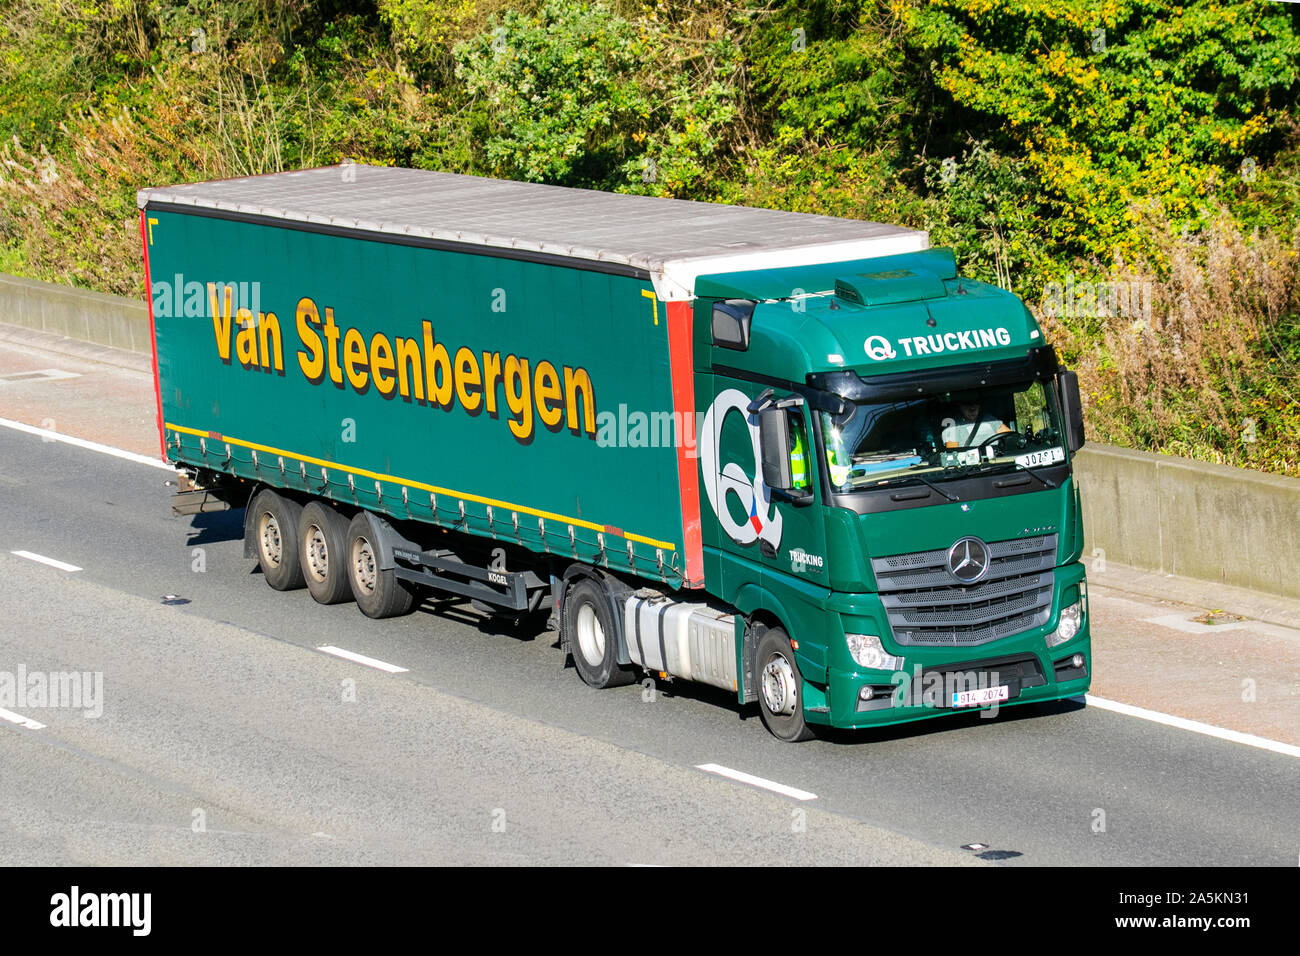 VAN STEENBERGEN Trucking; Haulage delivery trucks, haulage, lorry,  transportation, truck, cargo, green Mercedes Benz Actros vehicle, delivery,  transport, industry, supply chain freight, on the M6 at Lancaster, UK Stock  Photo - Alamy